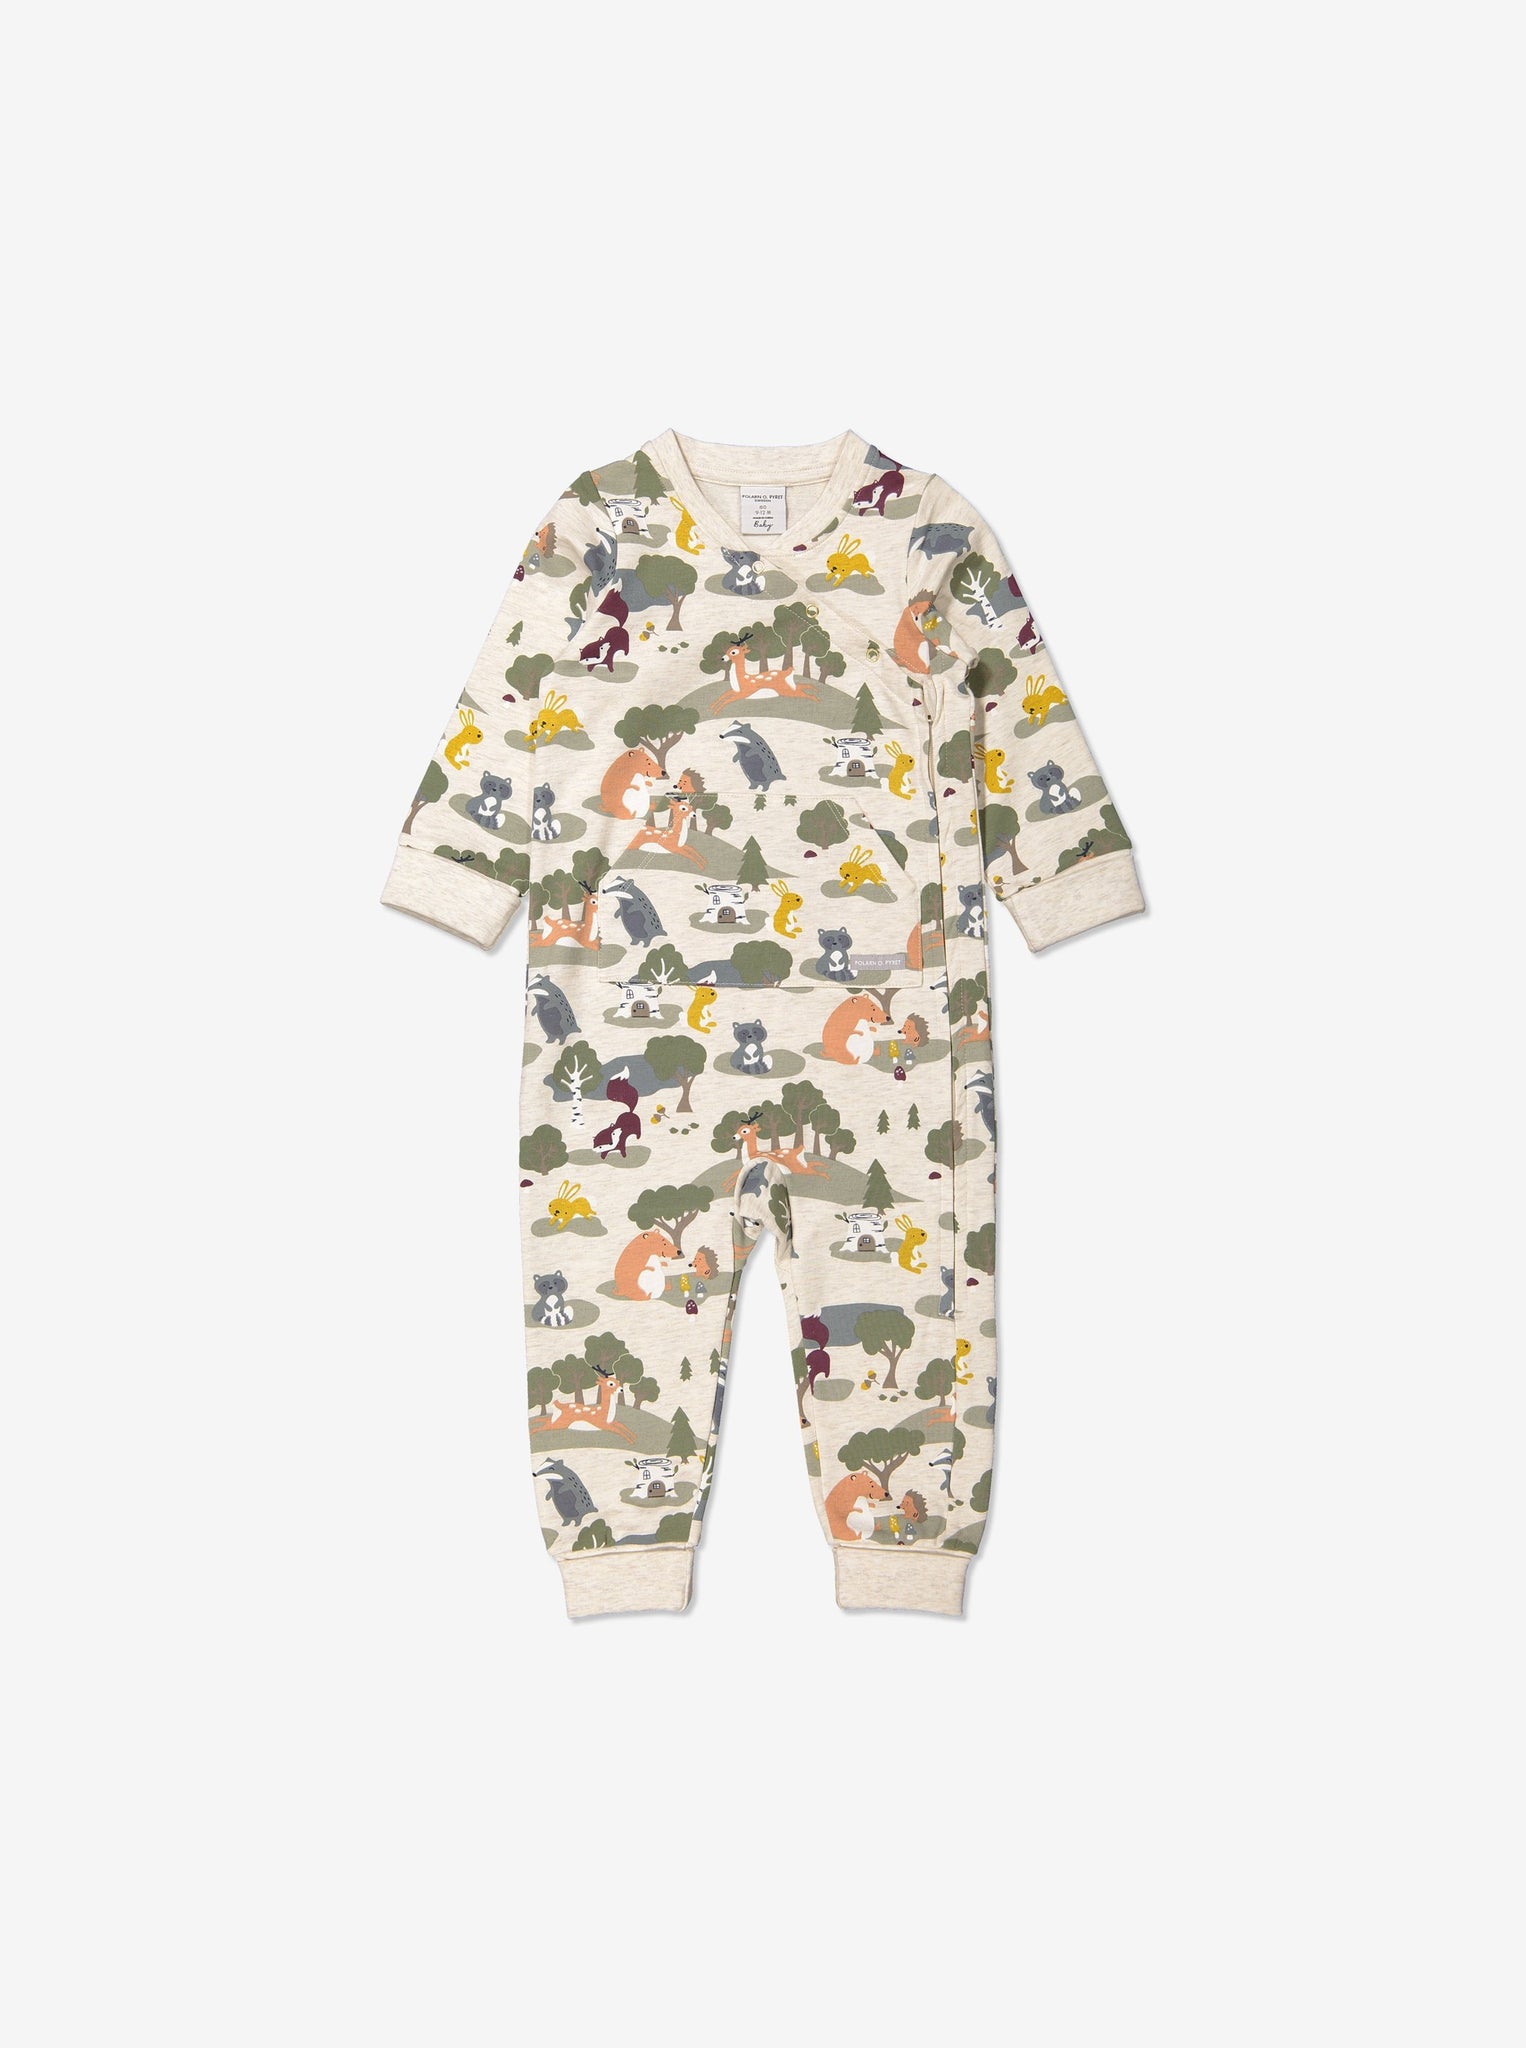 Animal Print White All In One, Unisex Baby Clothes | Polarn O. Pyret UK